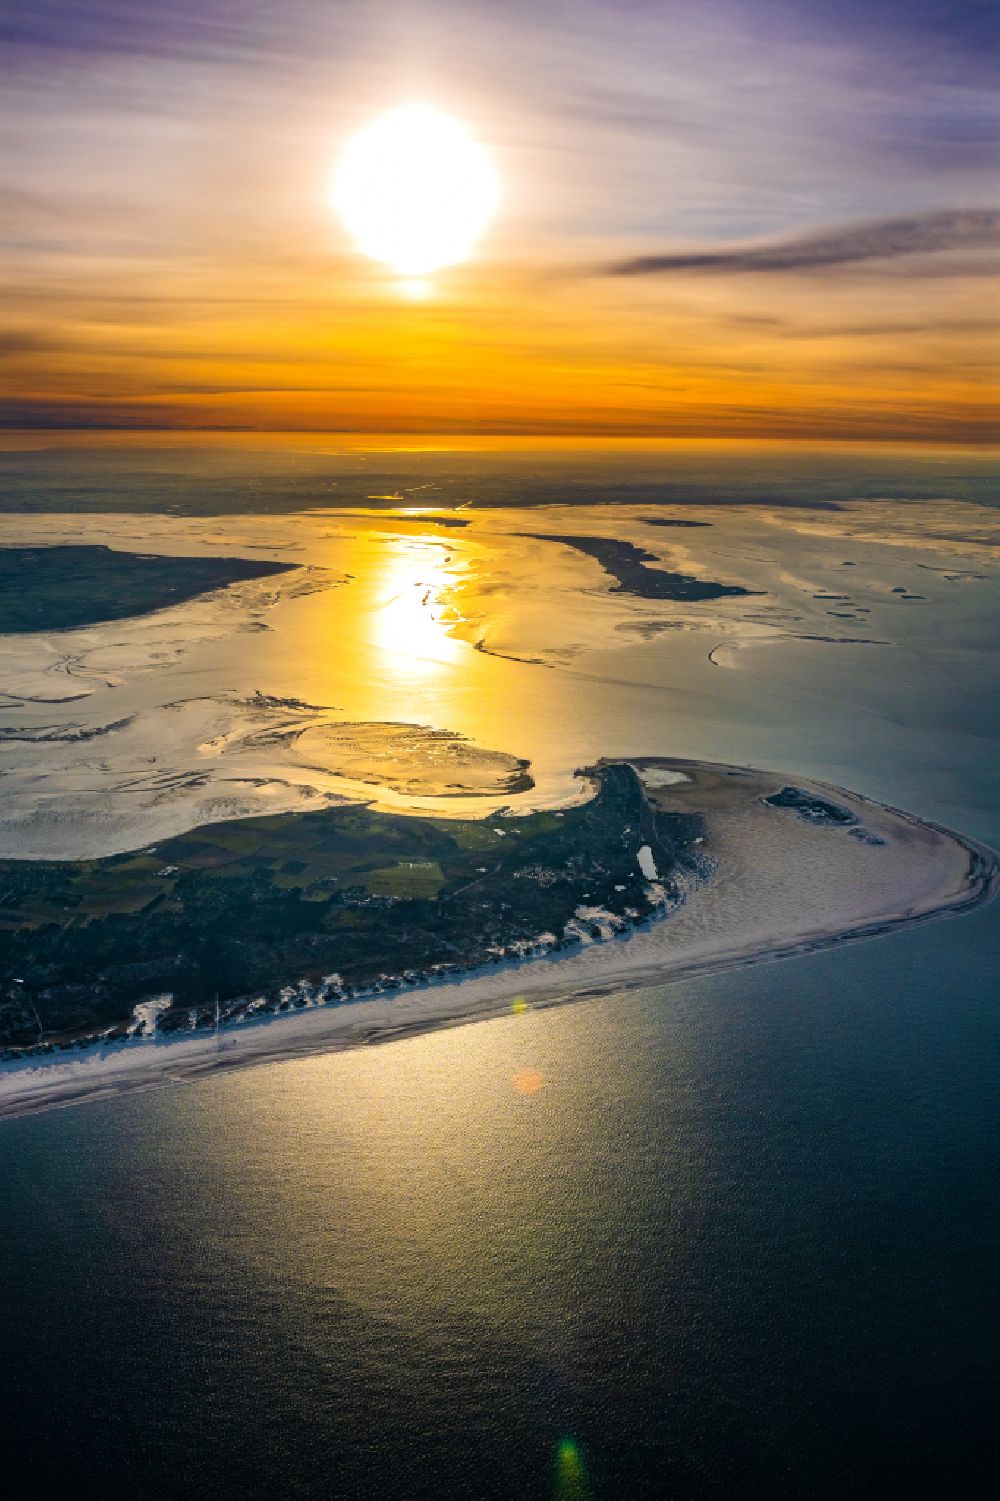 Wittdün auf Amrum from above - Sandy beach - landscape of the coastal area of the North Sea at sunrise - island in Wittduen on Amrum in the state Schleswig-Holstein, Germany